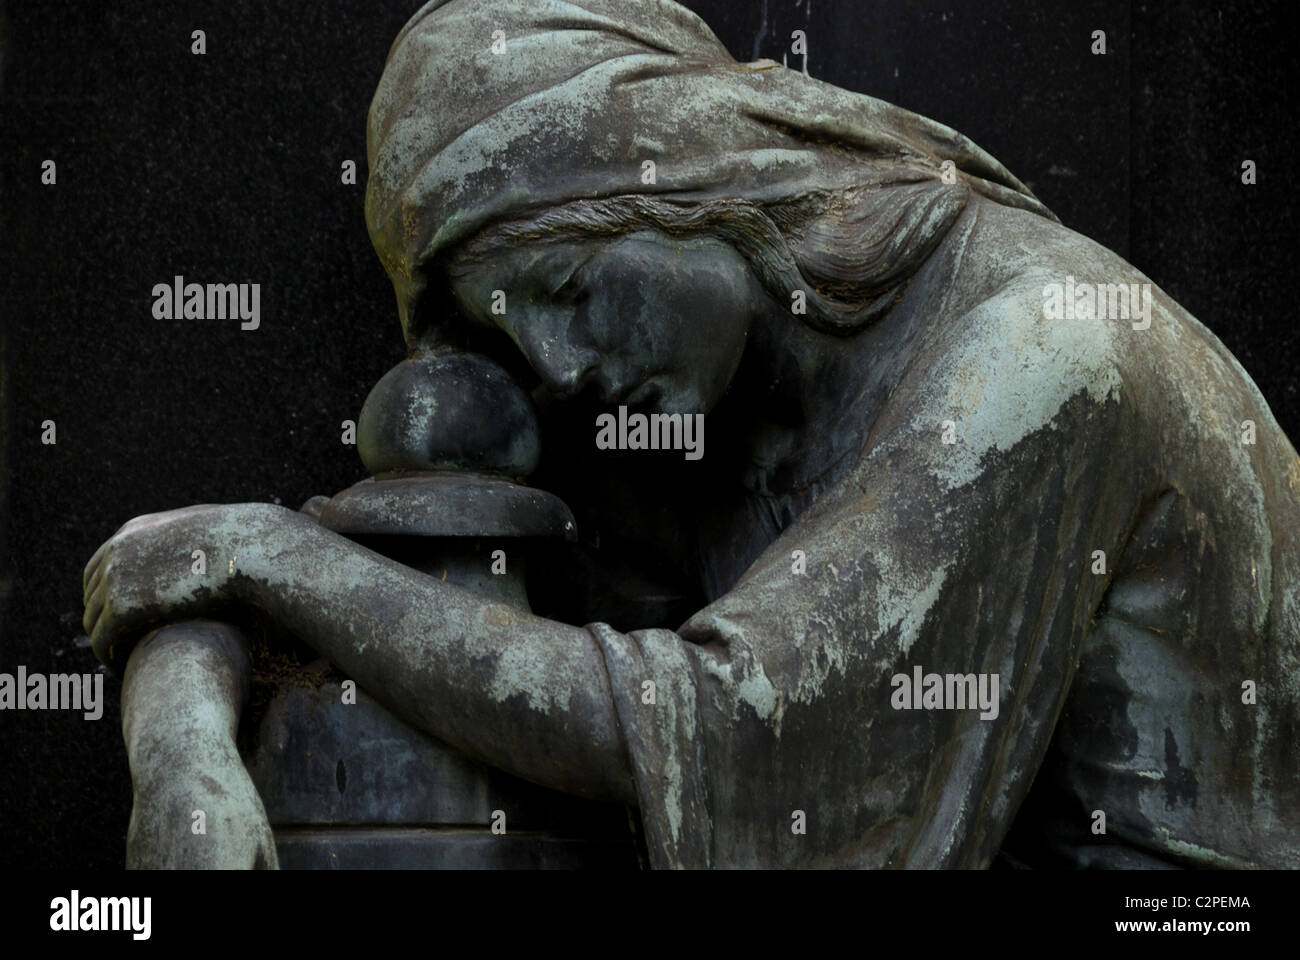 Cemetery sculpture - Grieving with urn Stock Photo